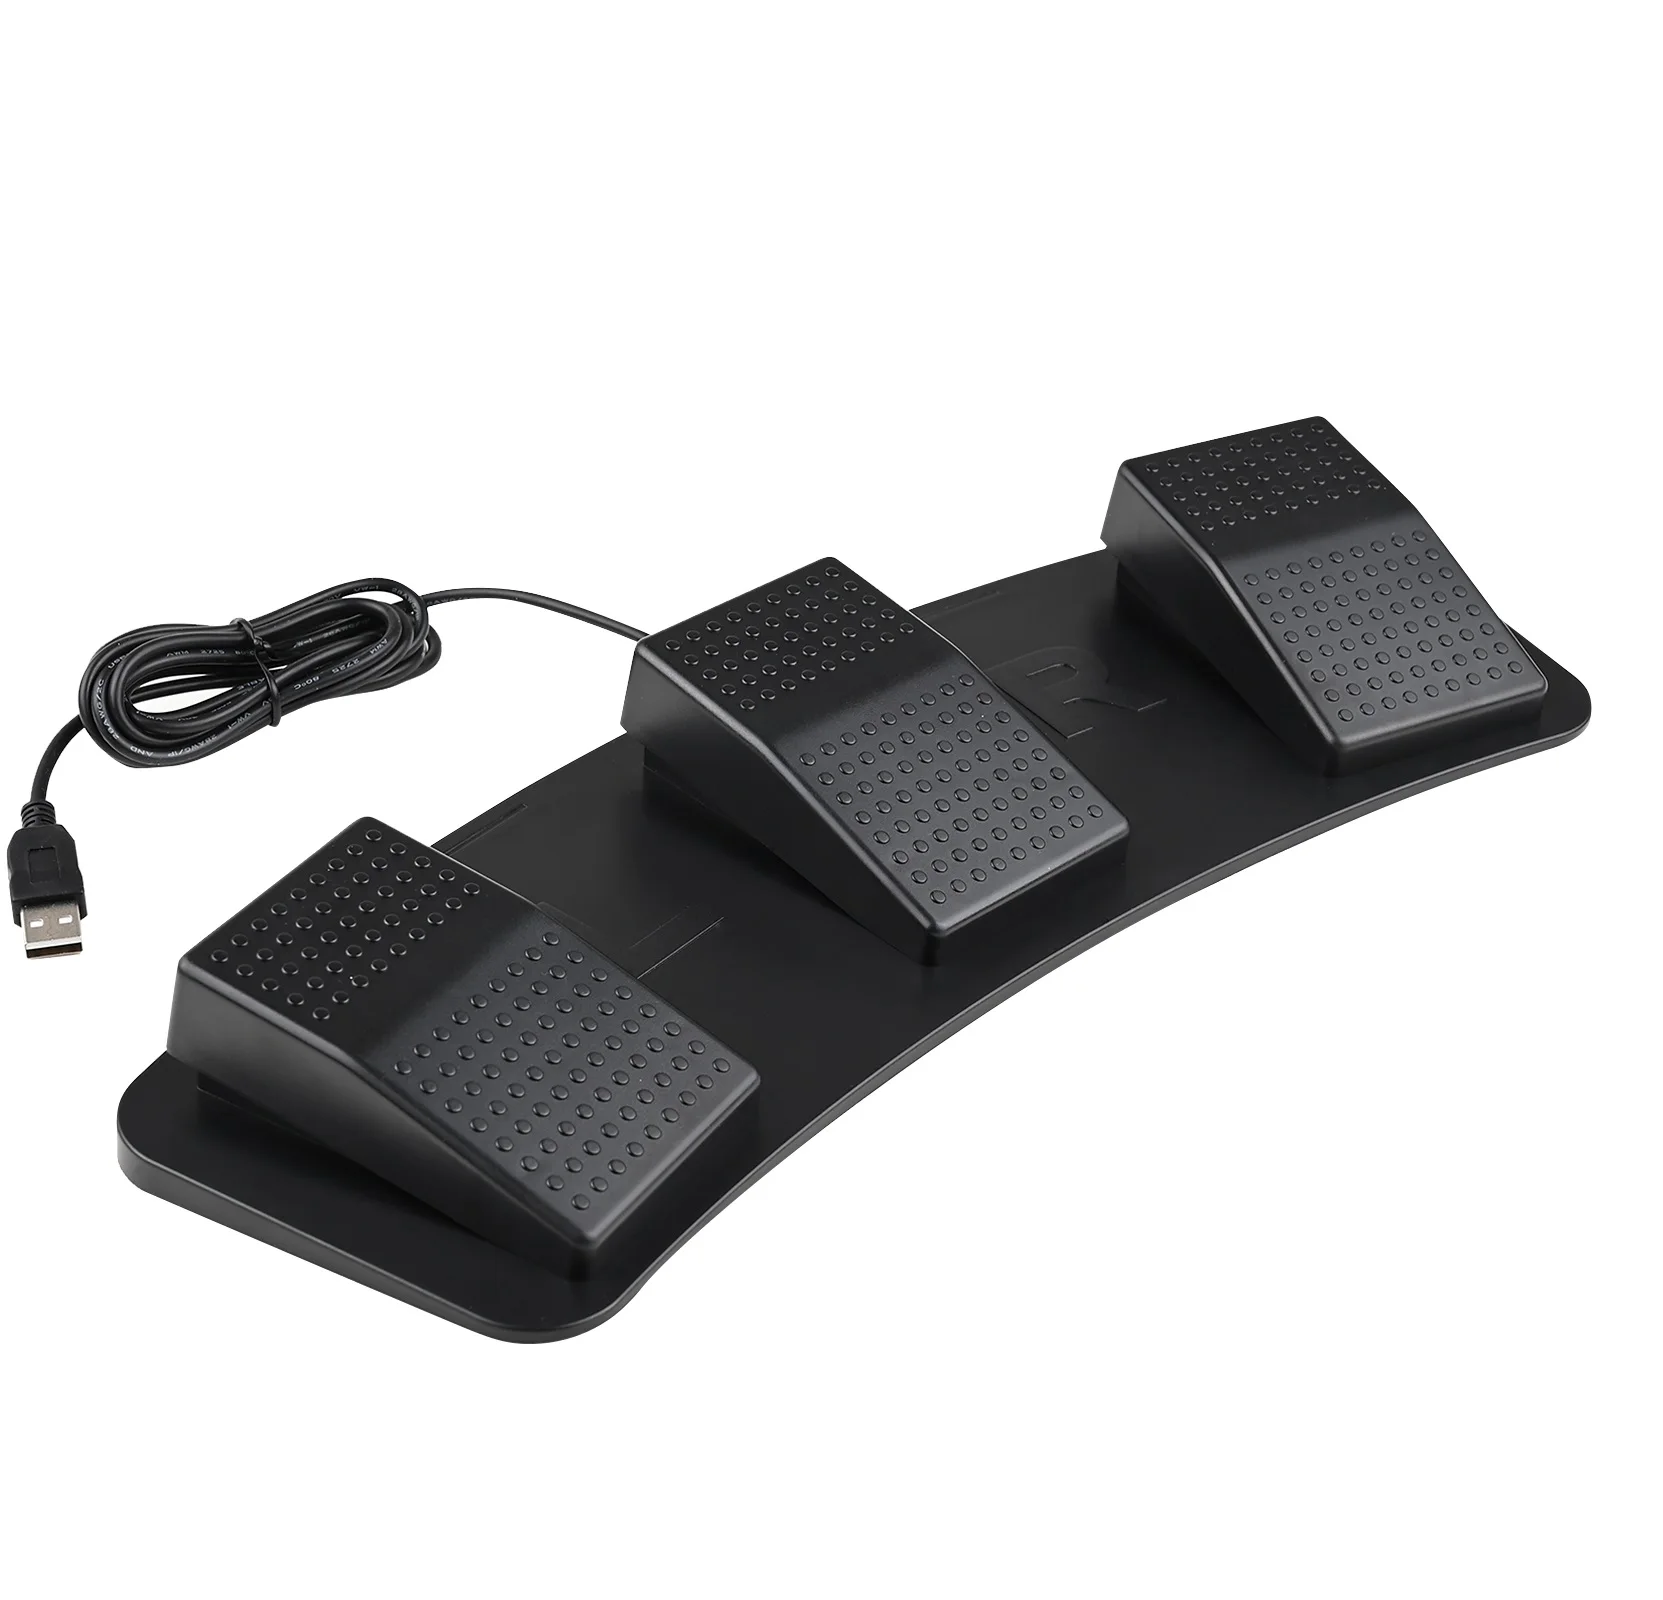 USB Triple Action Foot Switch Keyboard Control Foot Pedal for playing games 